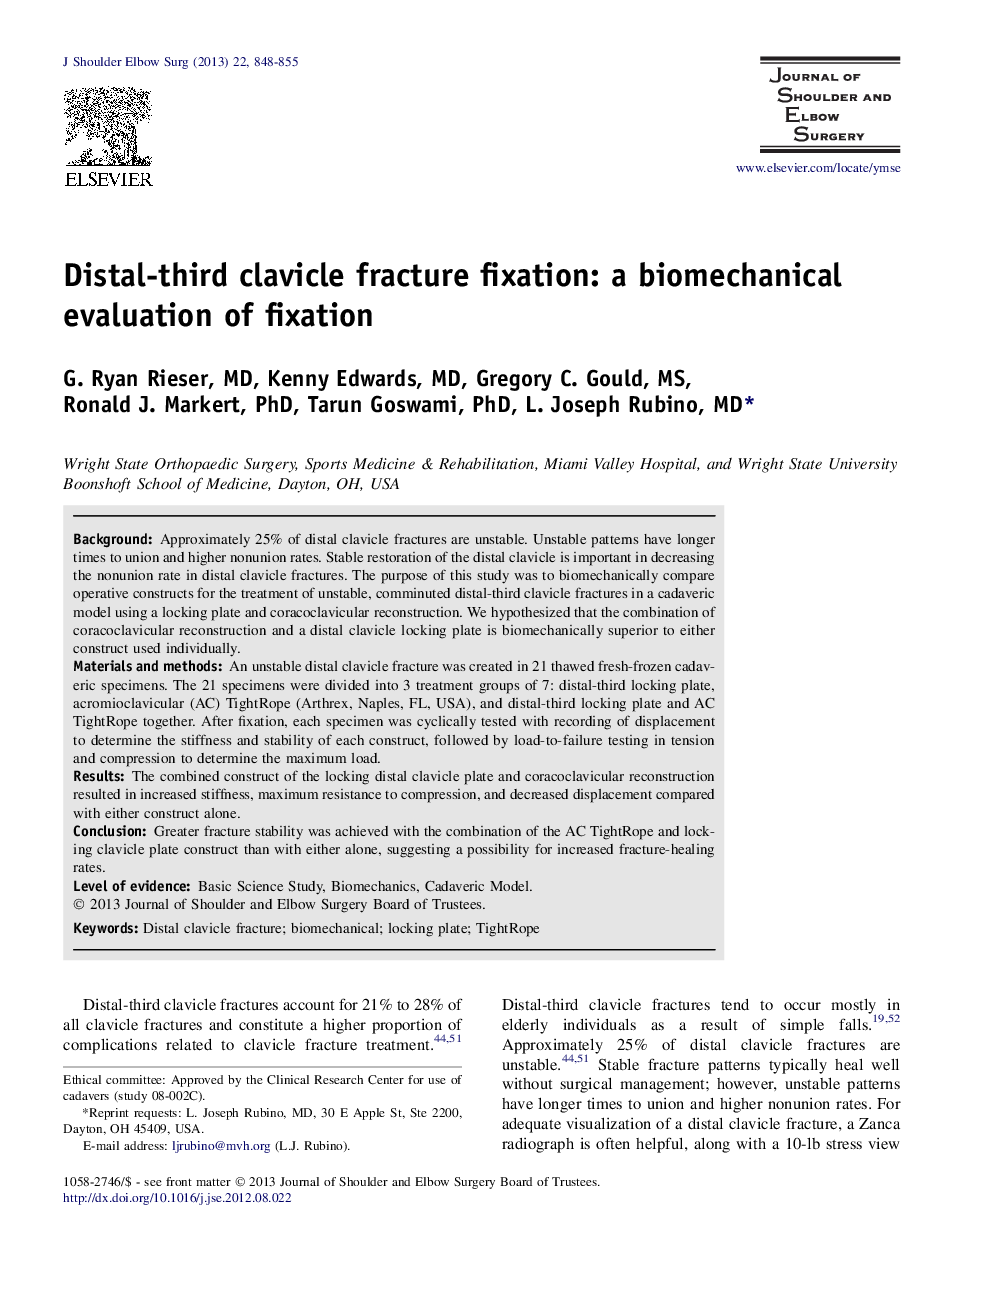 Distal-third clavicle fracture fixation: a biomechanical evaluation of fixation 